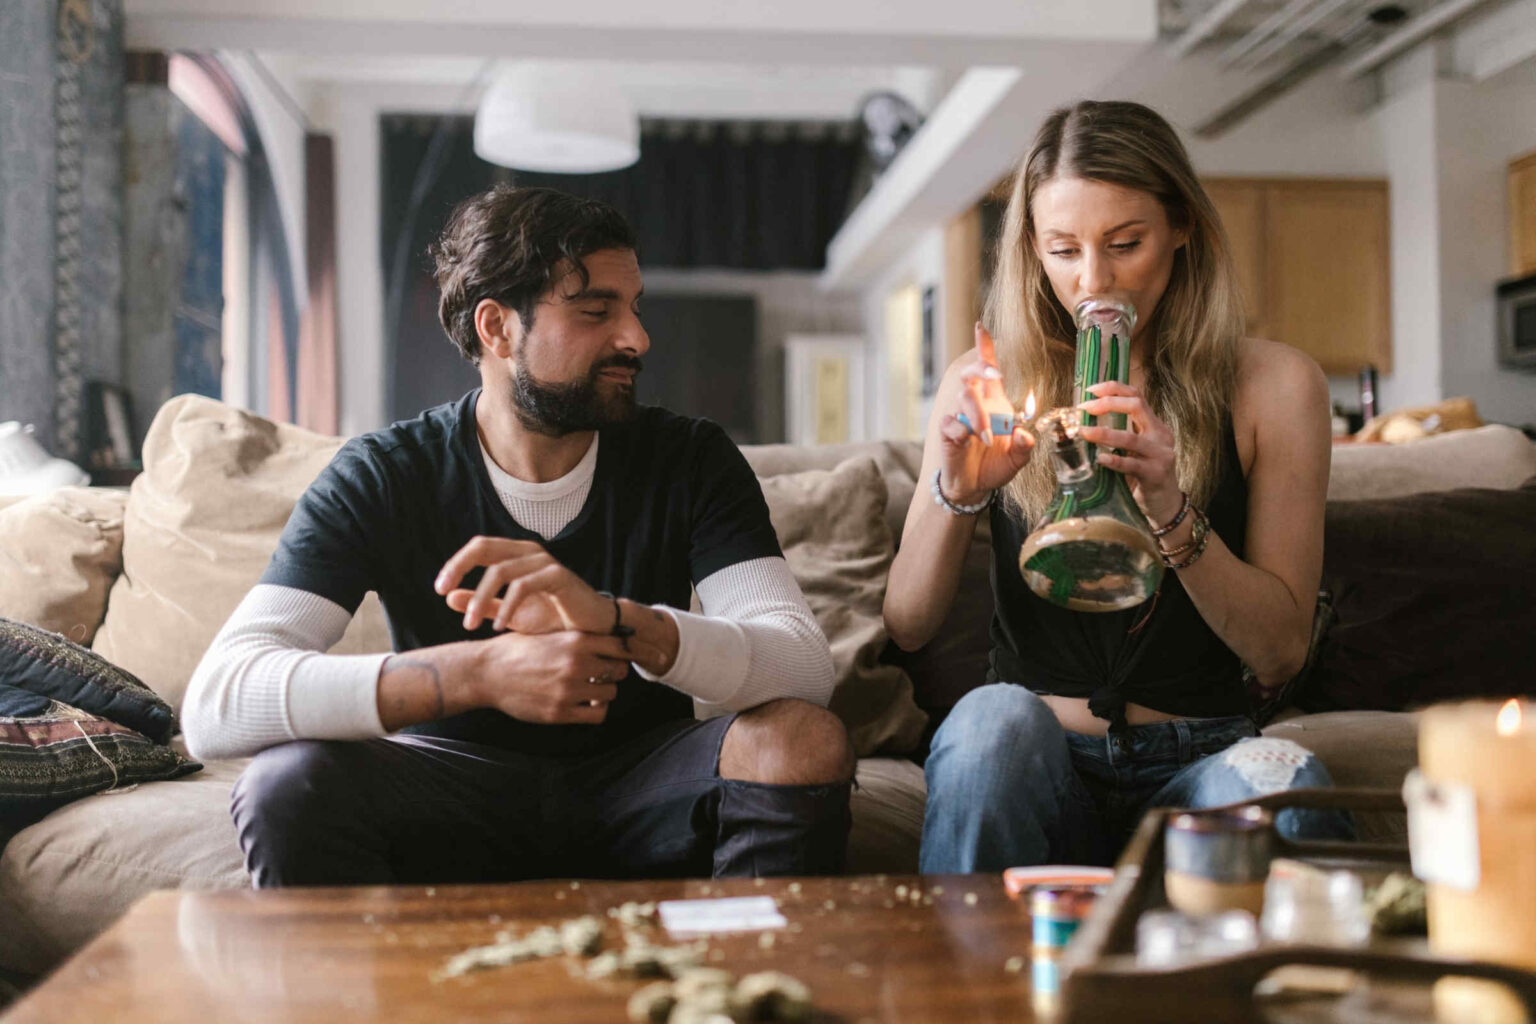 Just how accurate is the consumption of cannabis in movies? See what regular smokers have to say about Hollywood's portrayal of their favorite pastime!